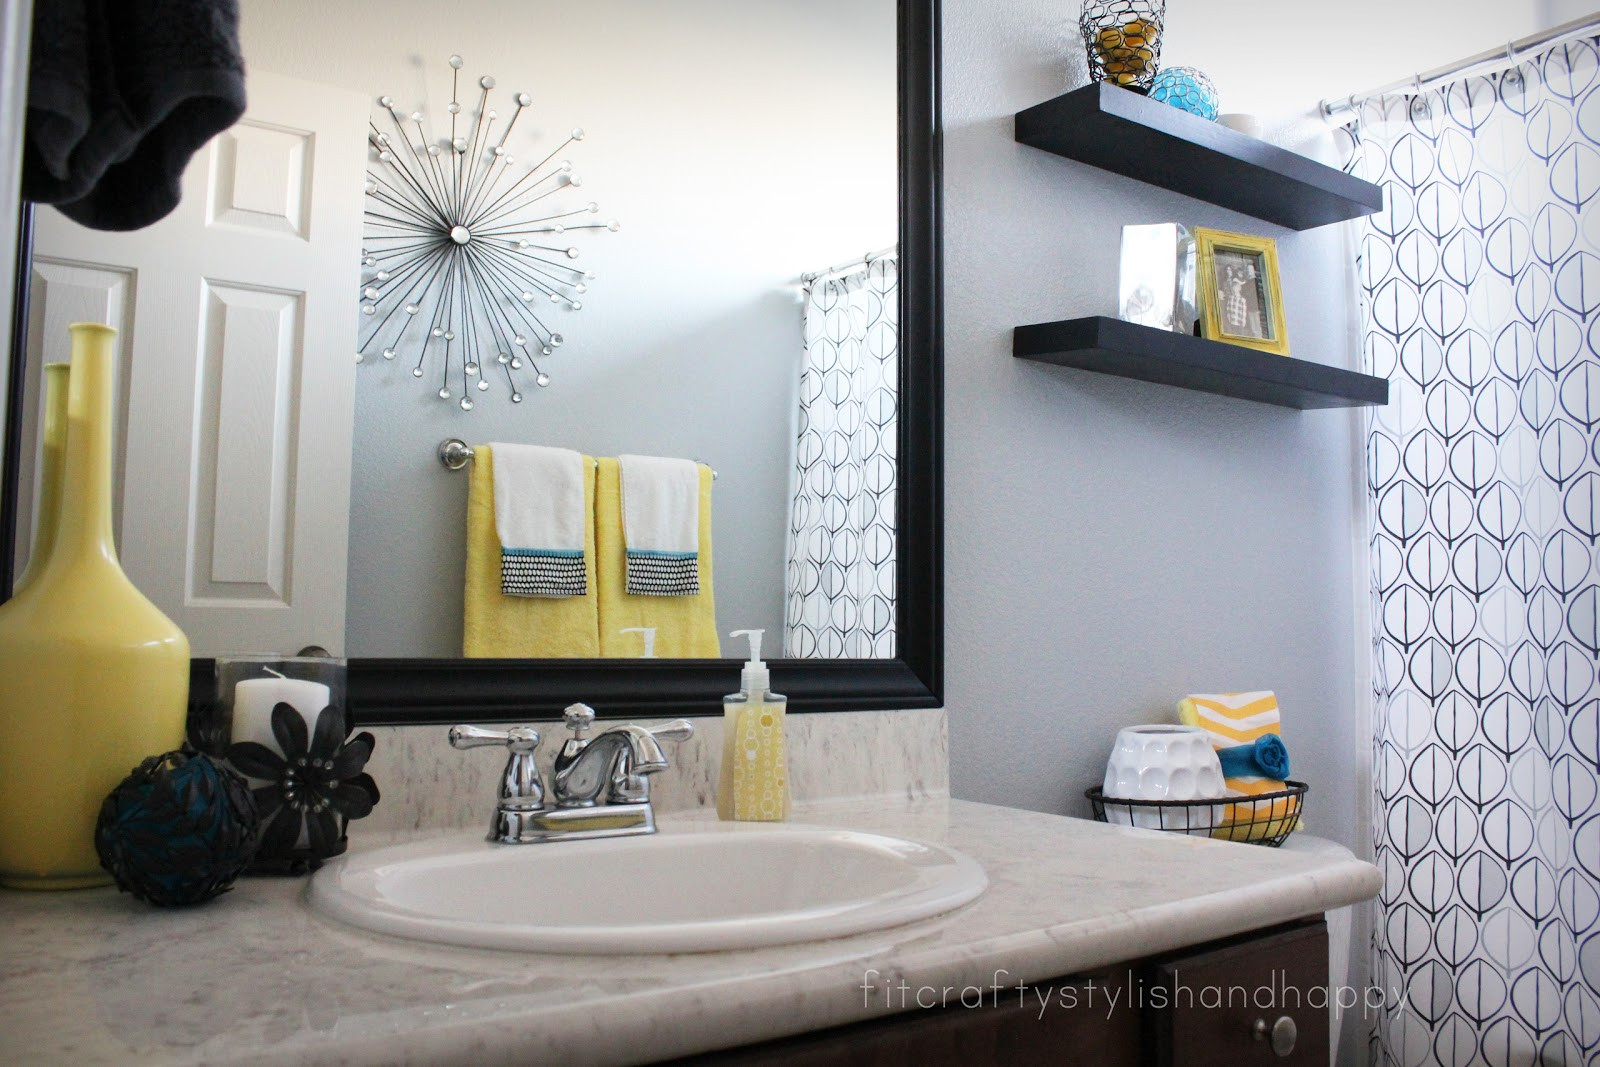 Yellow And Gray Bathroom Decor
 Fit Crafty Stylish and Happy Guest Bathroom Makeover